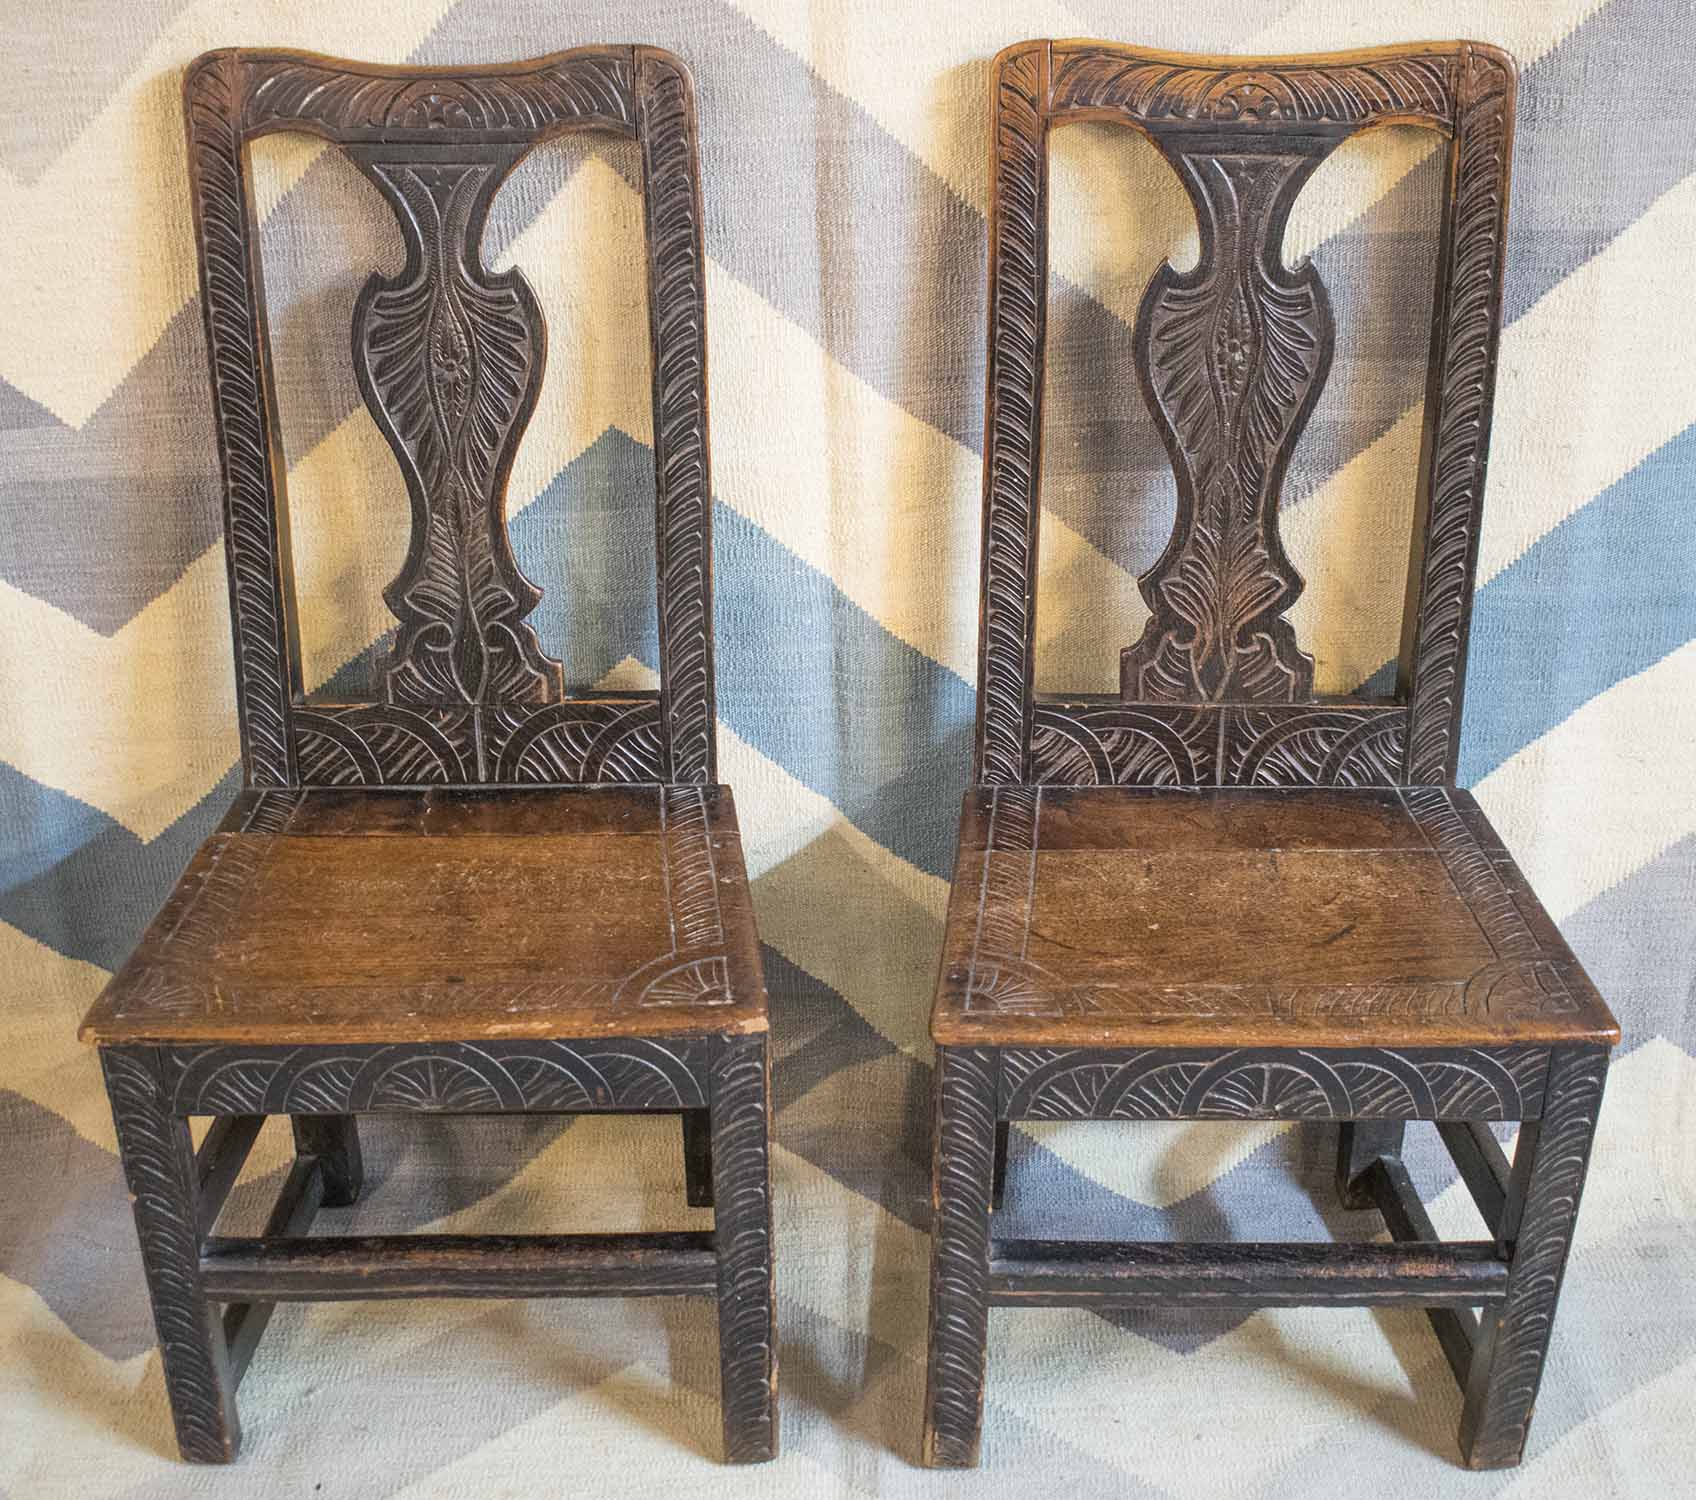 SIDE CHAIRS, a pair, early 18th century elm with all over carving.